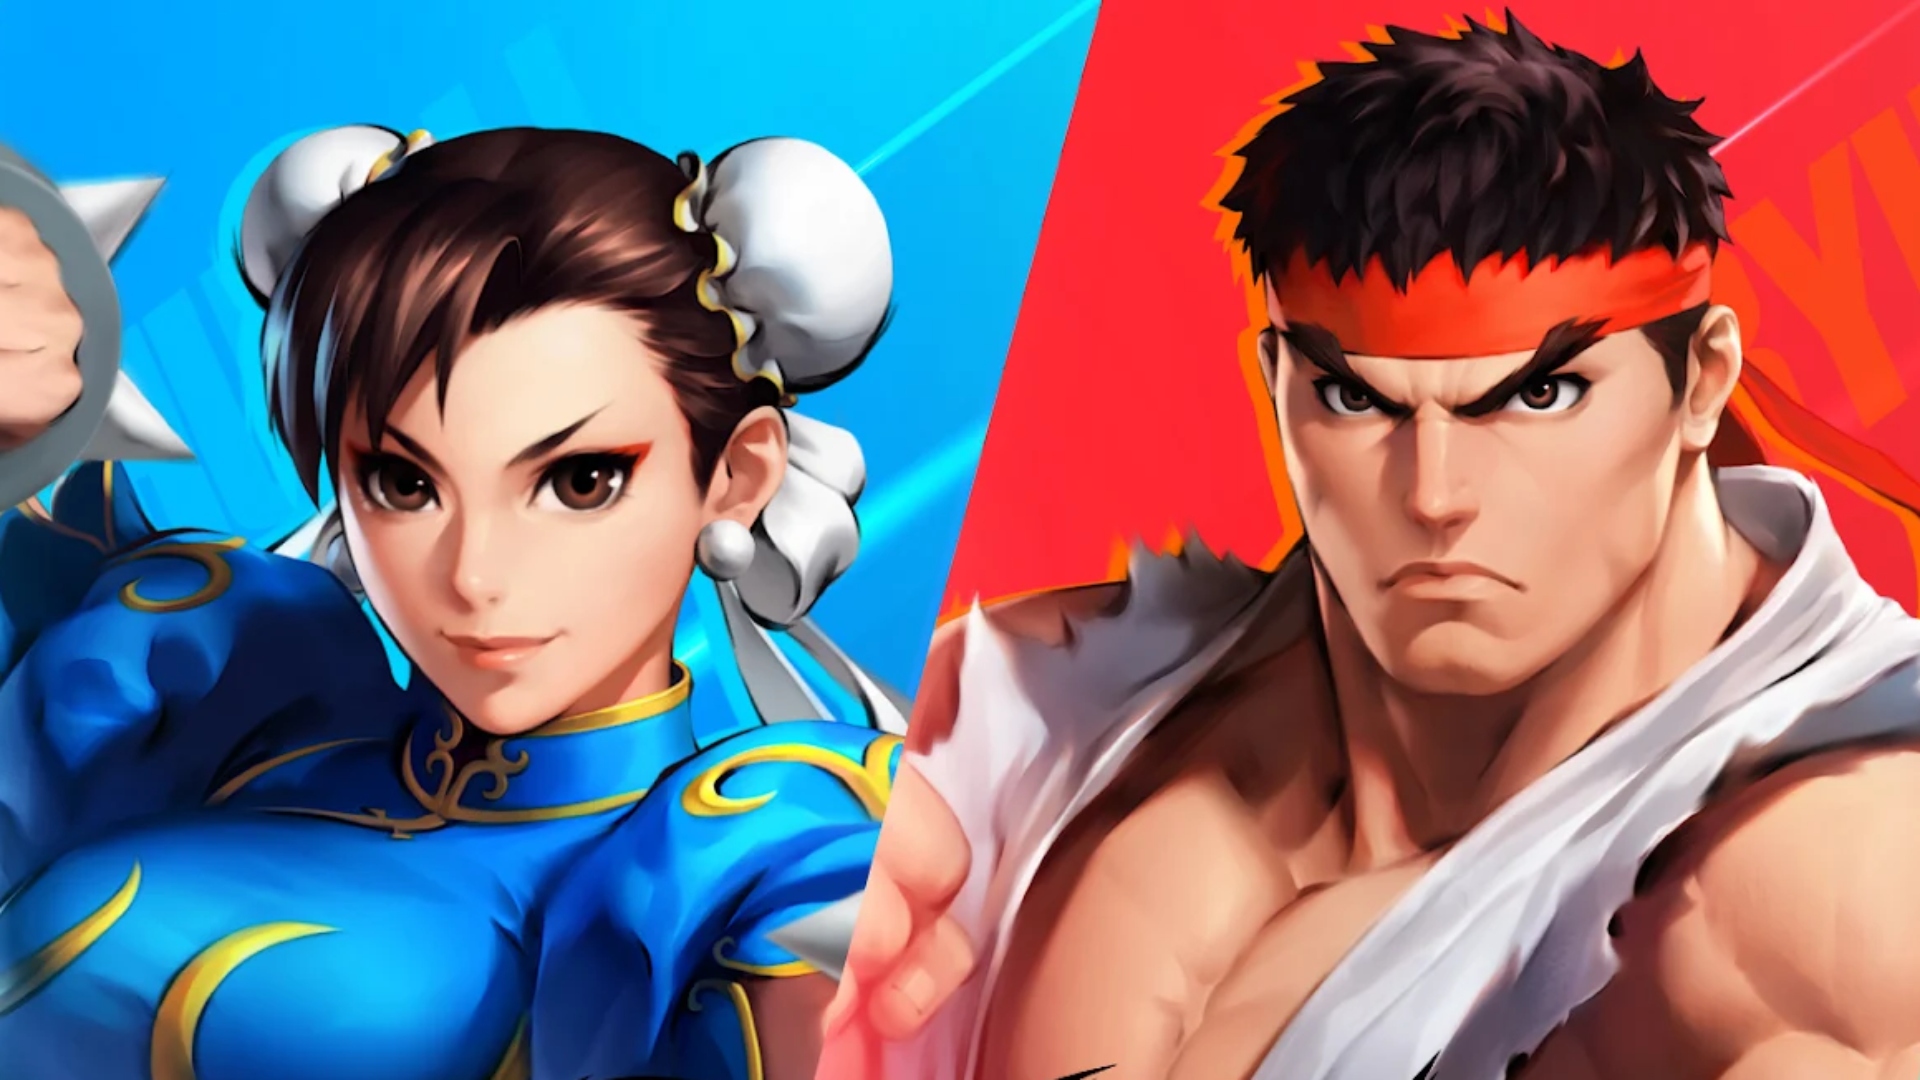 Street Fighter Duel: All Launch Characters Listed - Prima Games